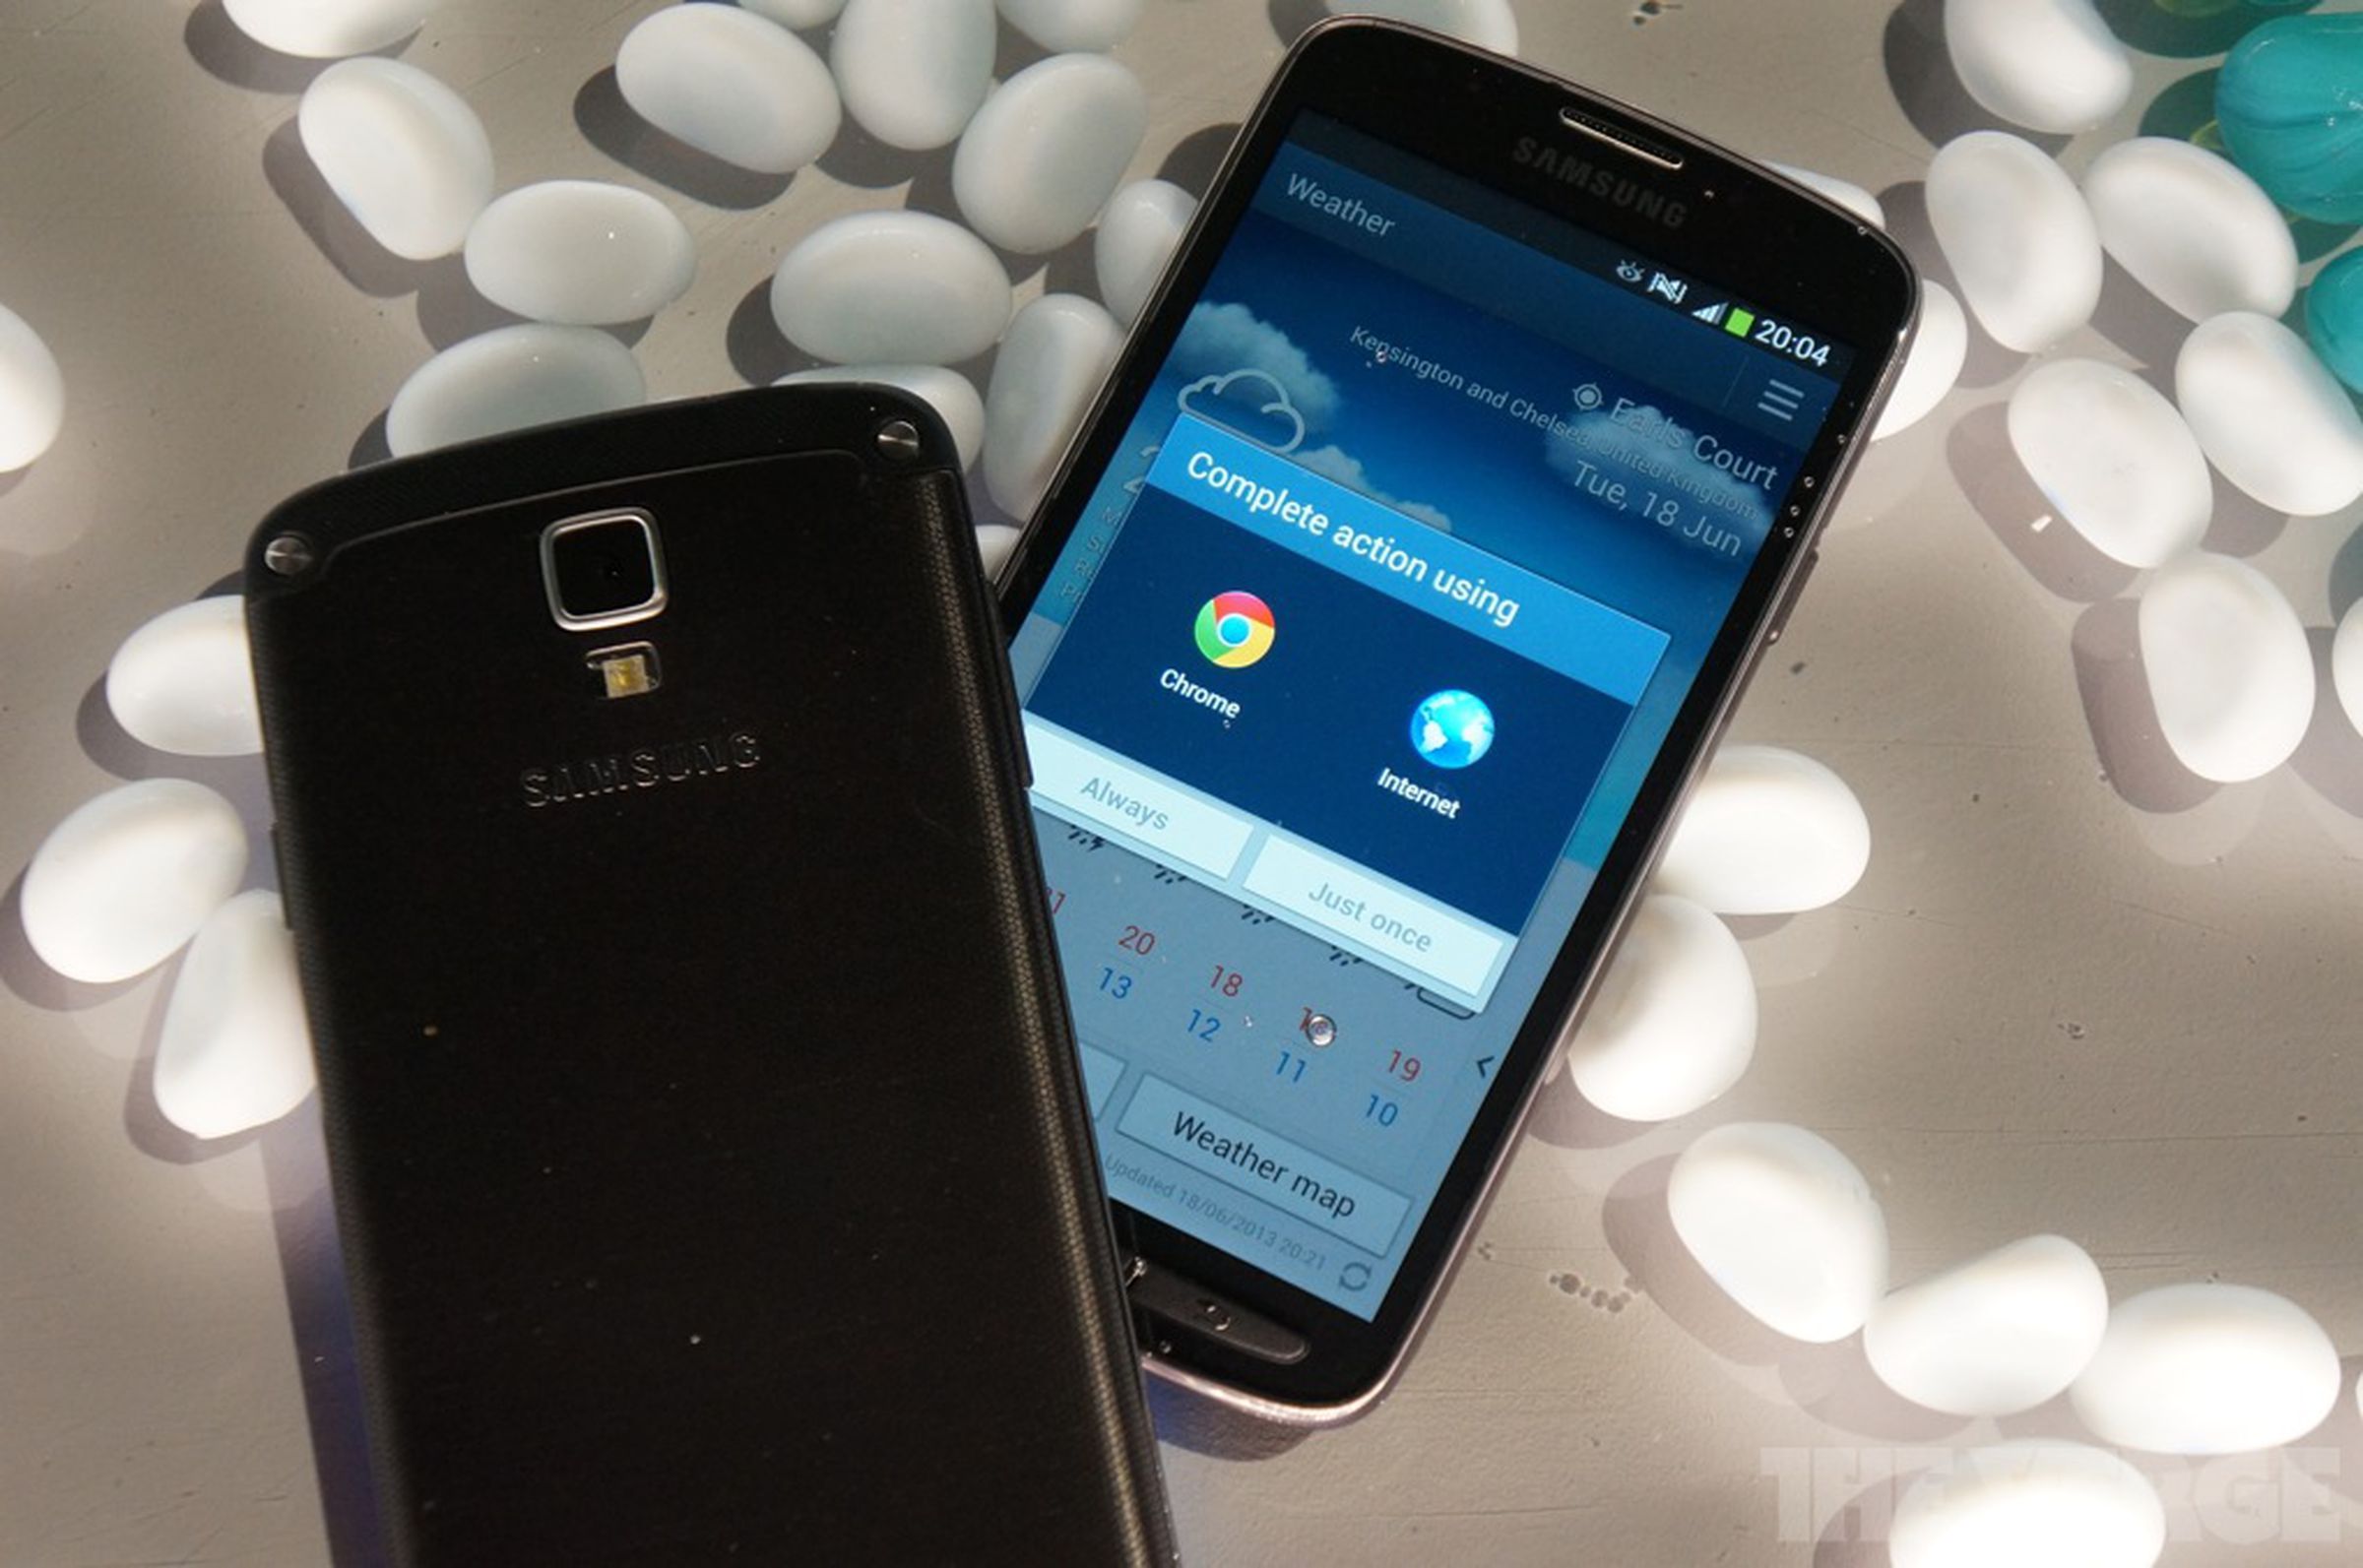 Samsung Galaxy S4 Active hands-on pictures